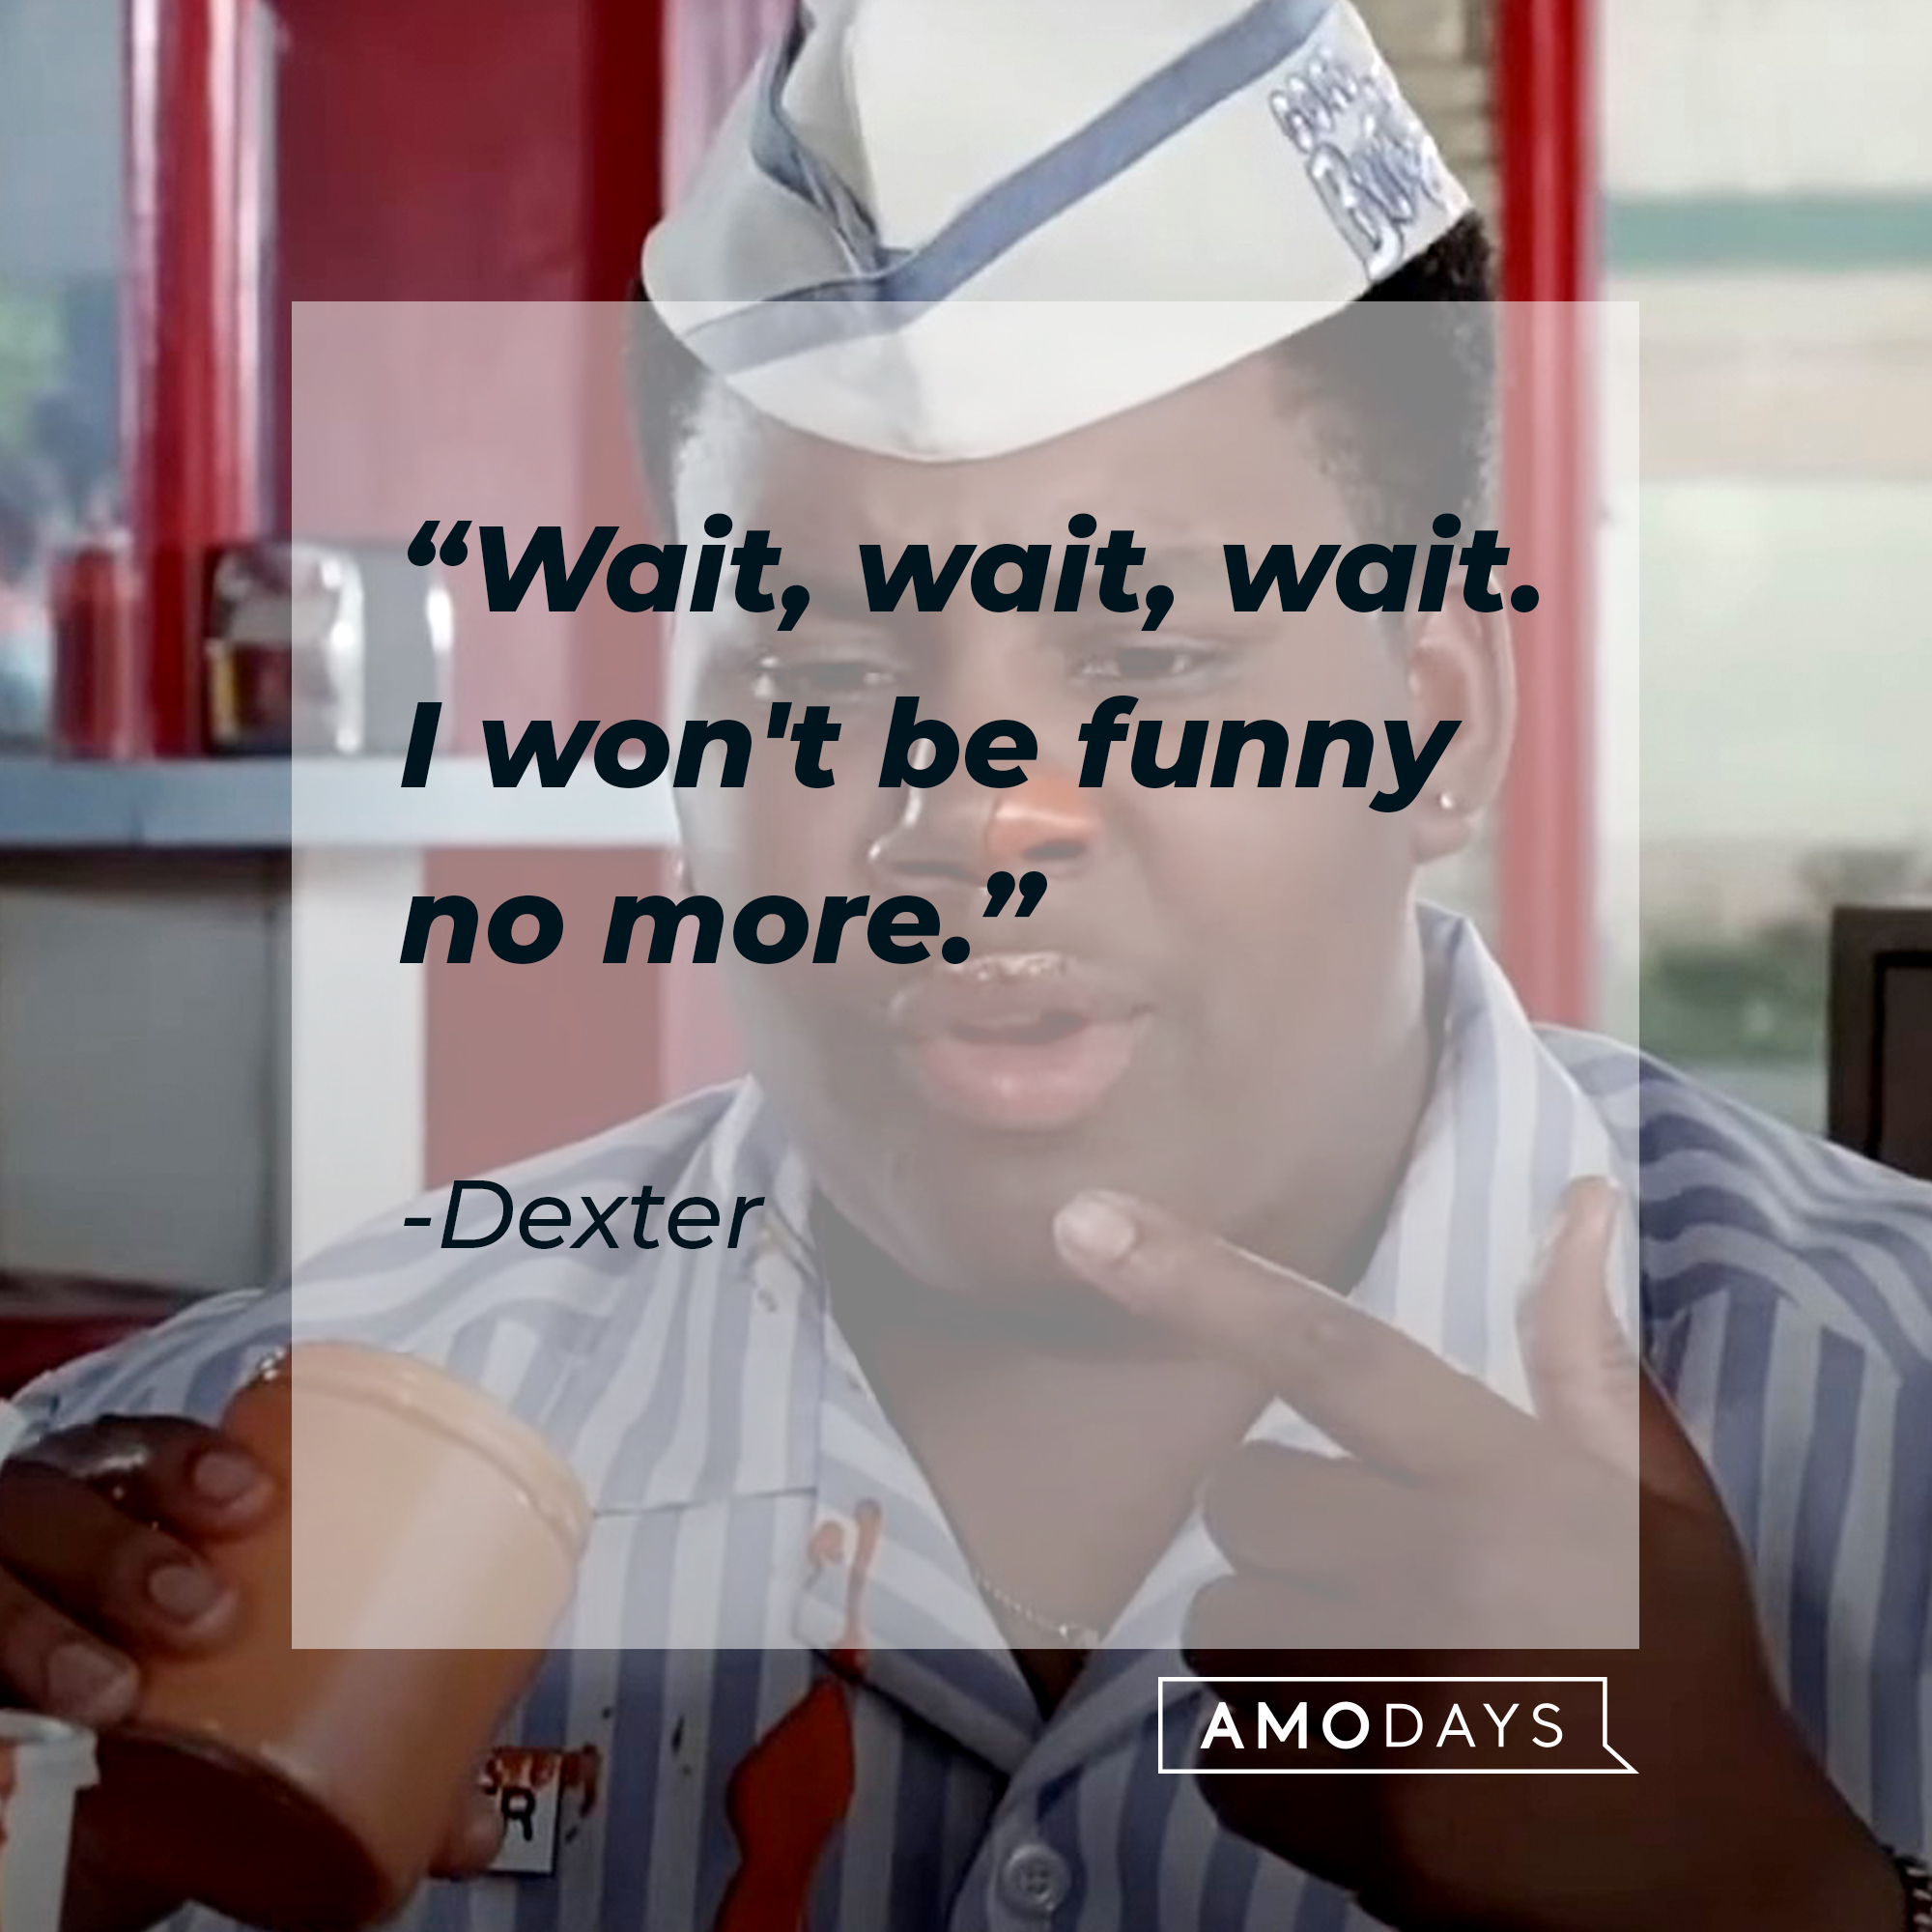 An image of Dexter with his quote: “Wait, wait, wait. I won't be funny no more.” | Source: AmoDays